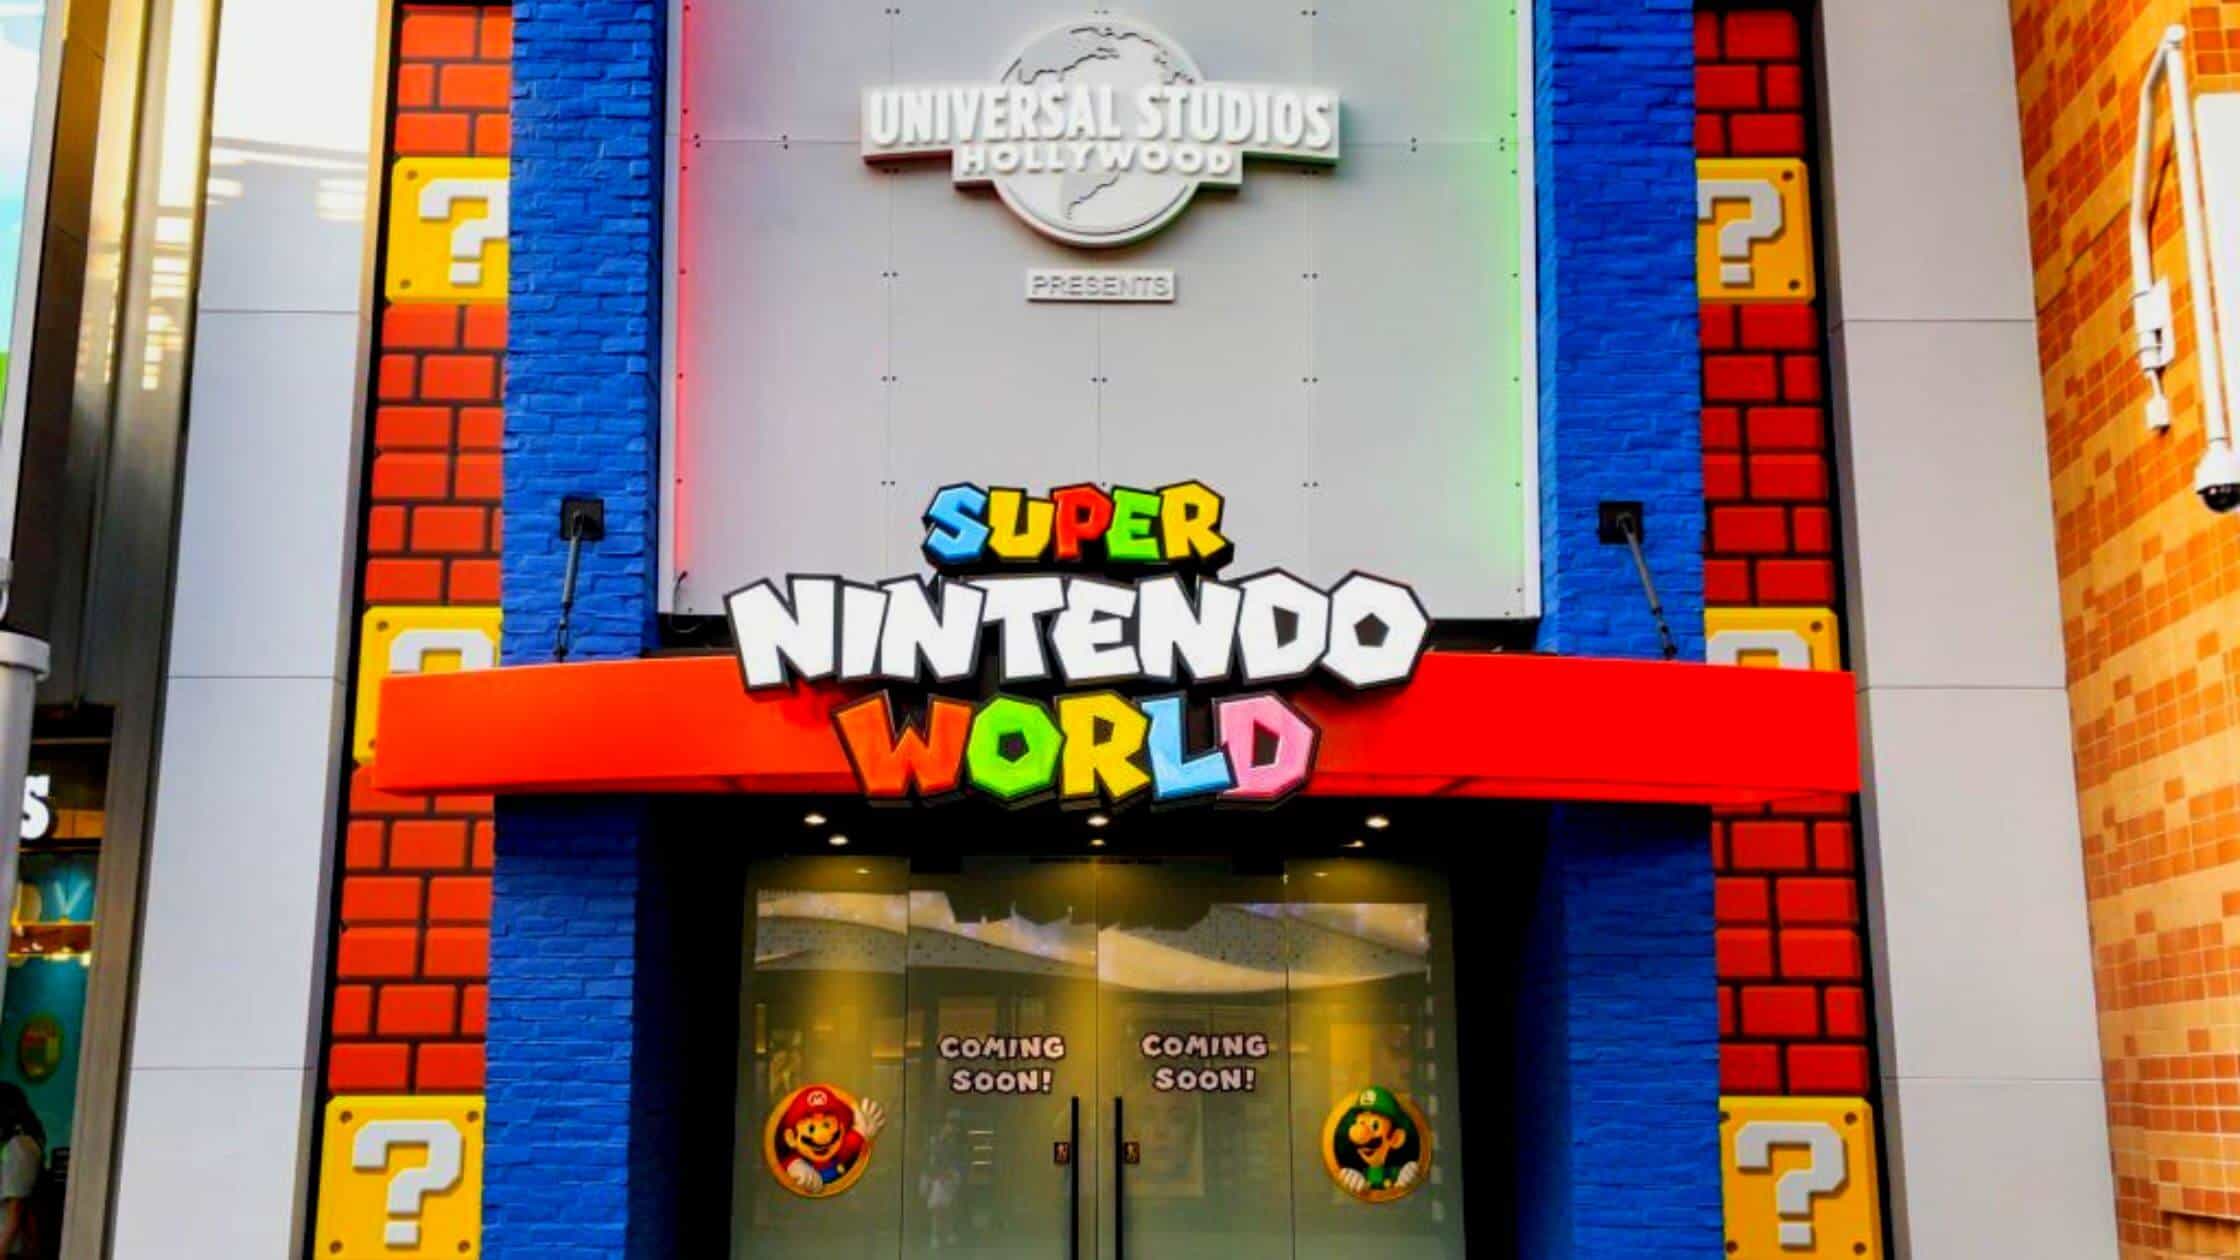 Super Nintendo World Is Slated To Debut In 2023 At Universal Studios Hollywood